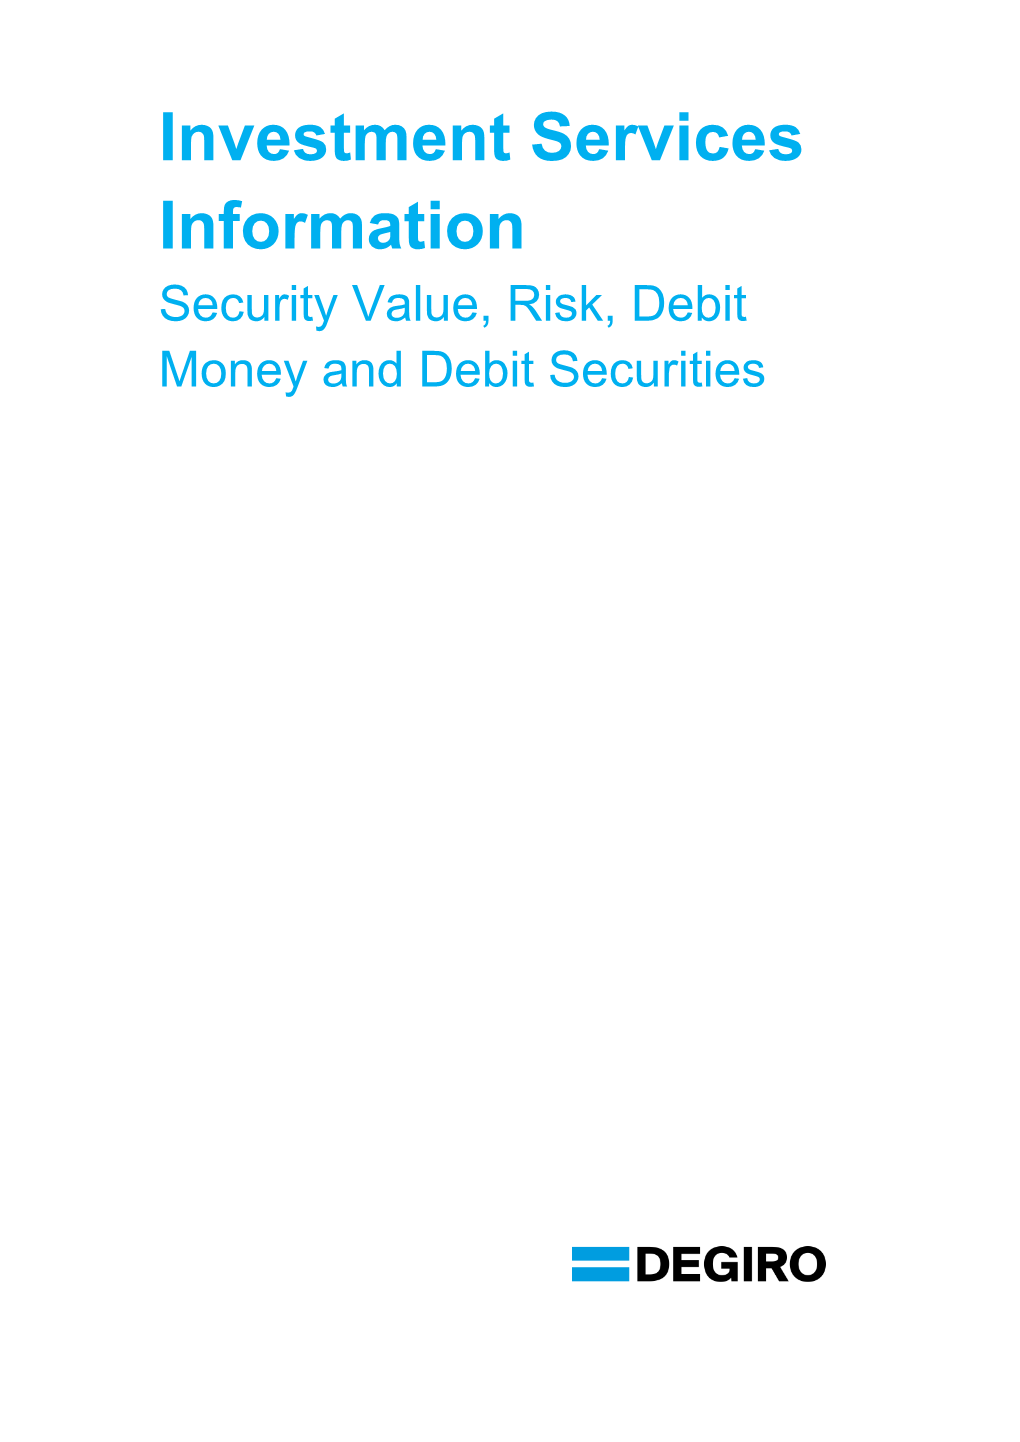 Investment Services Information Security Value, Risk, Debit Money and Debit Securities